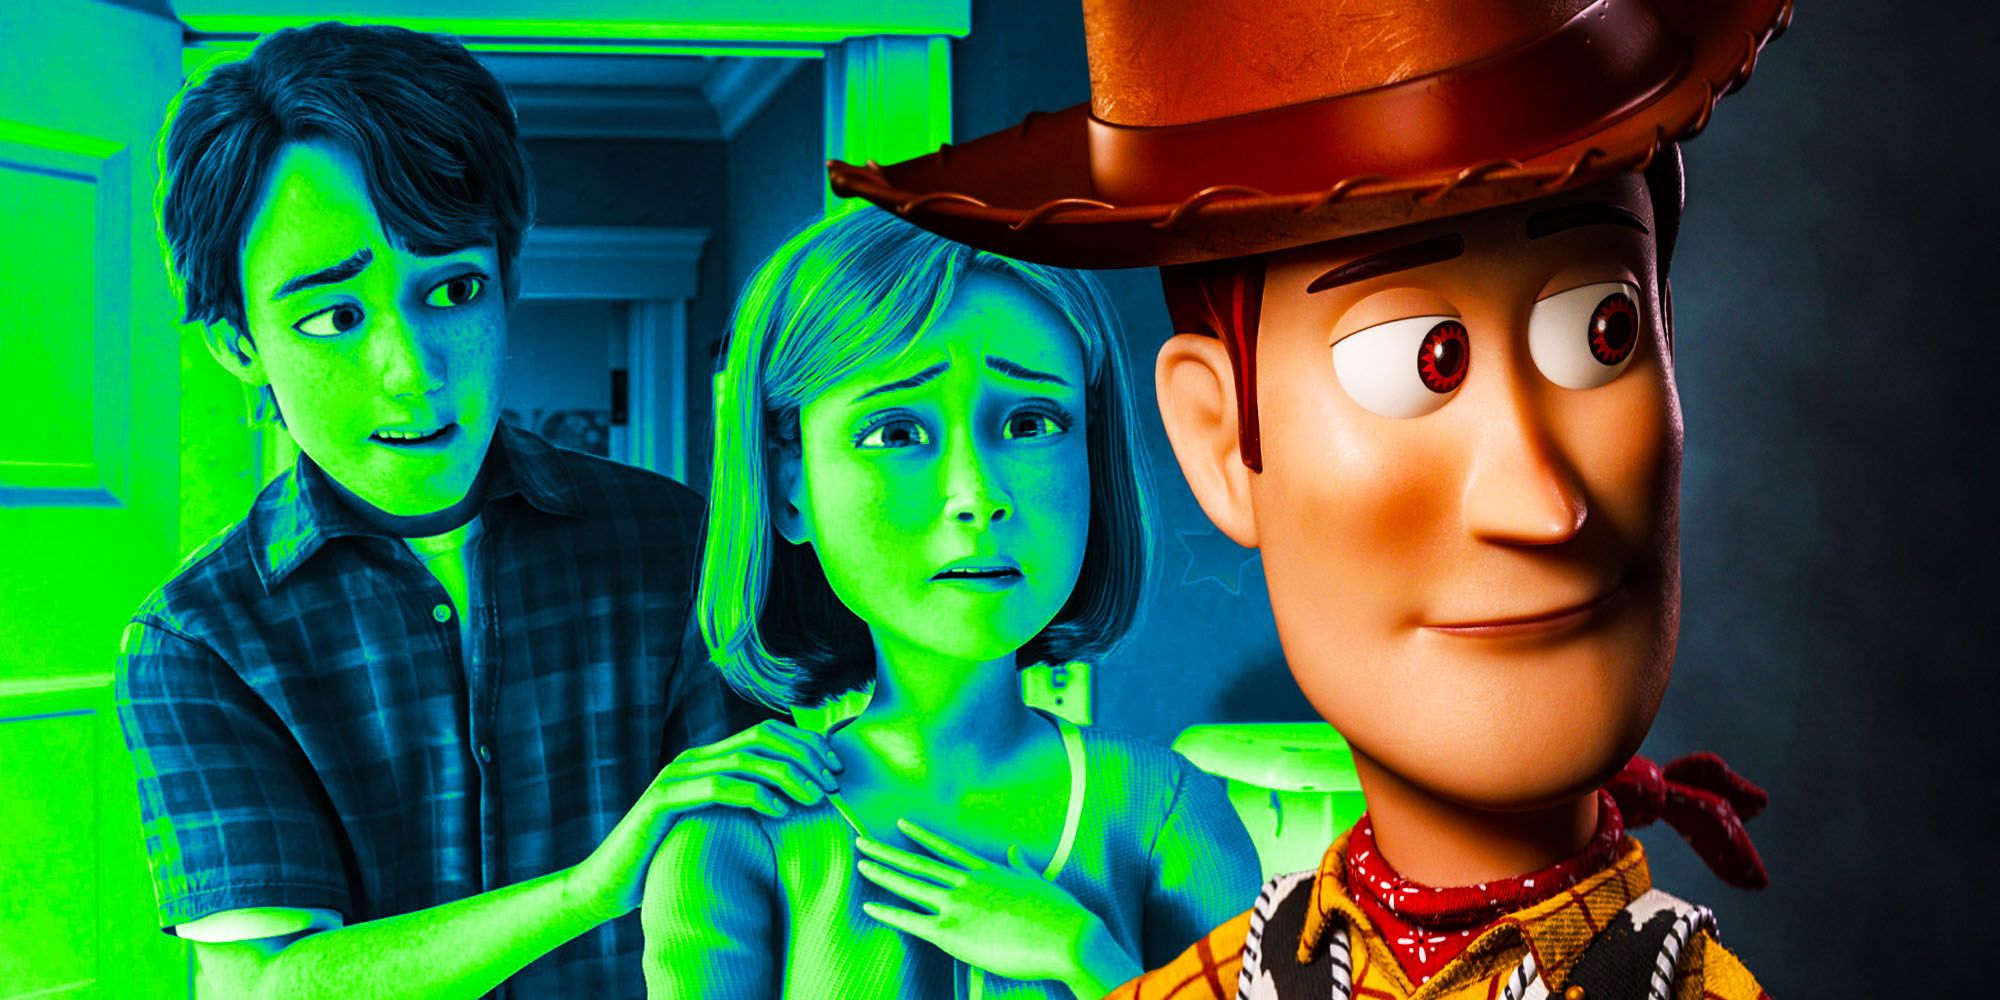 Toy Story' Fans Are Upset After Realizing New Name Scribbled on